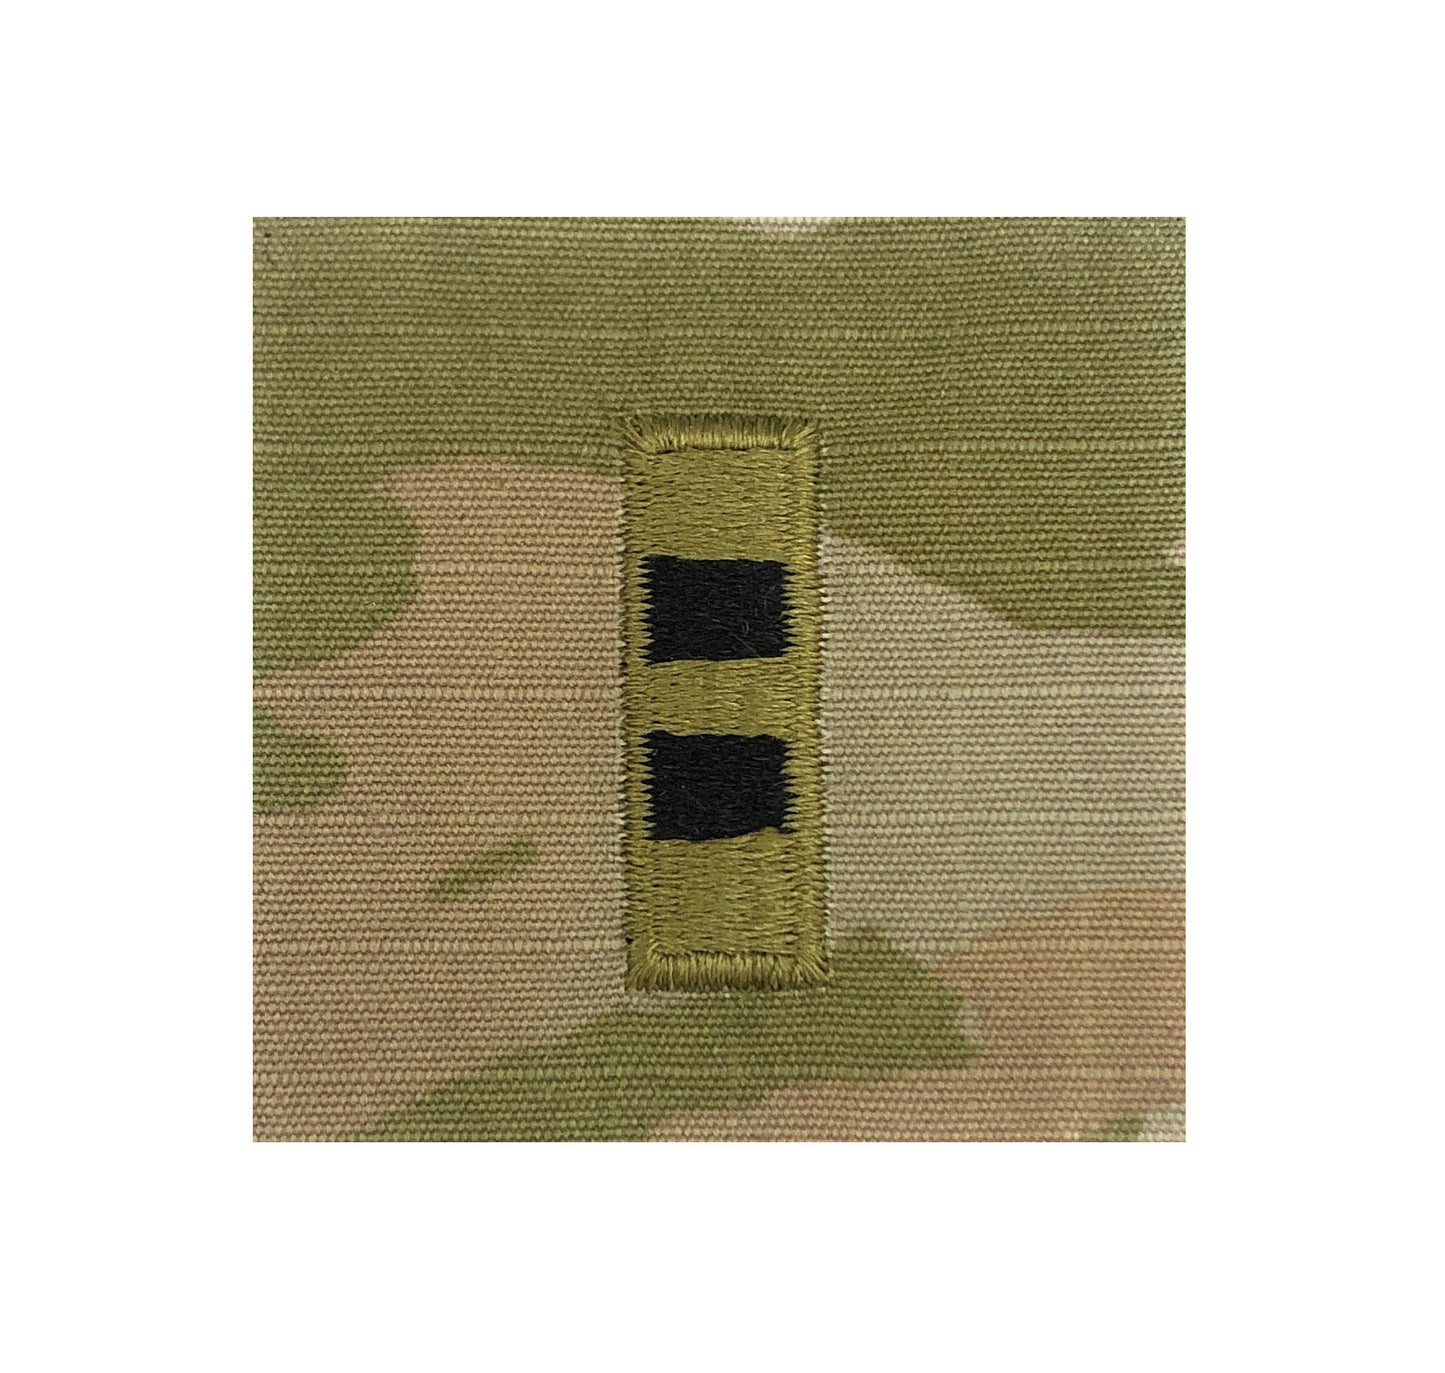 US Army W2 Chief Warrant Officer 2 OCP 2x2 Sew-On Rank For Shirt,Jacket,Coat